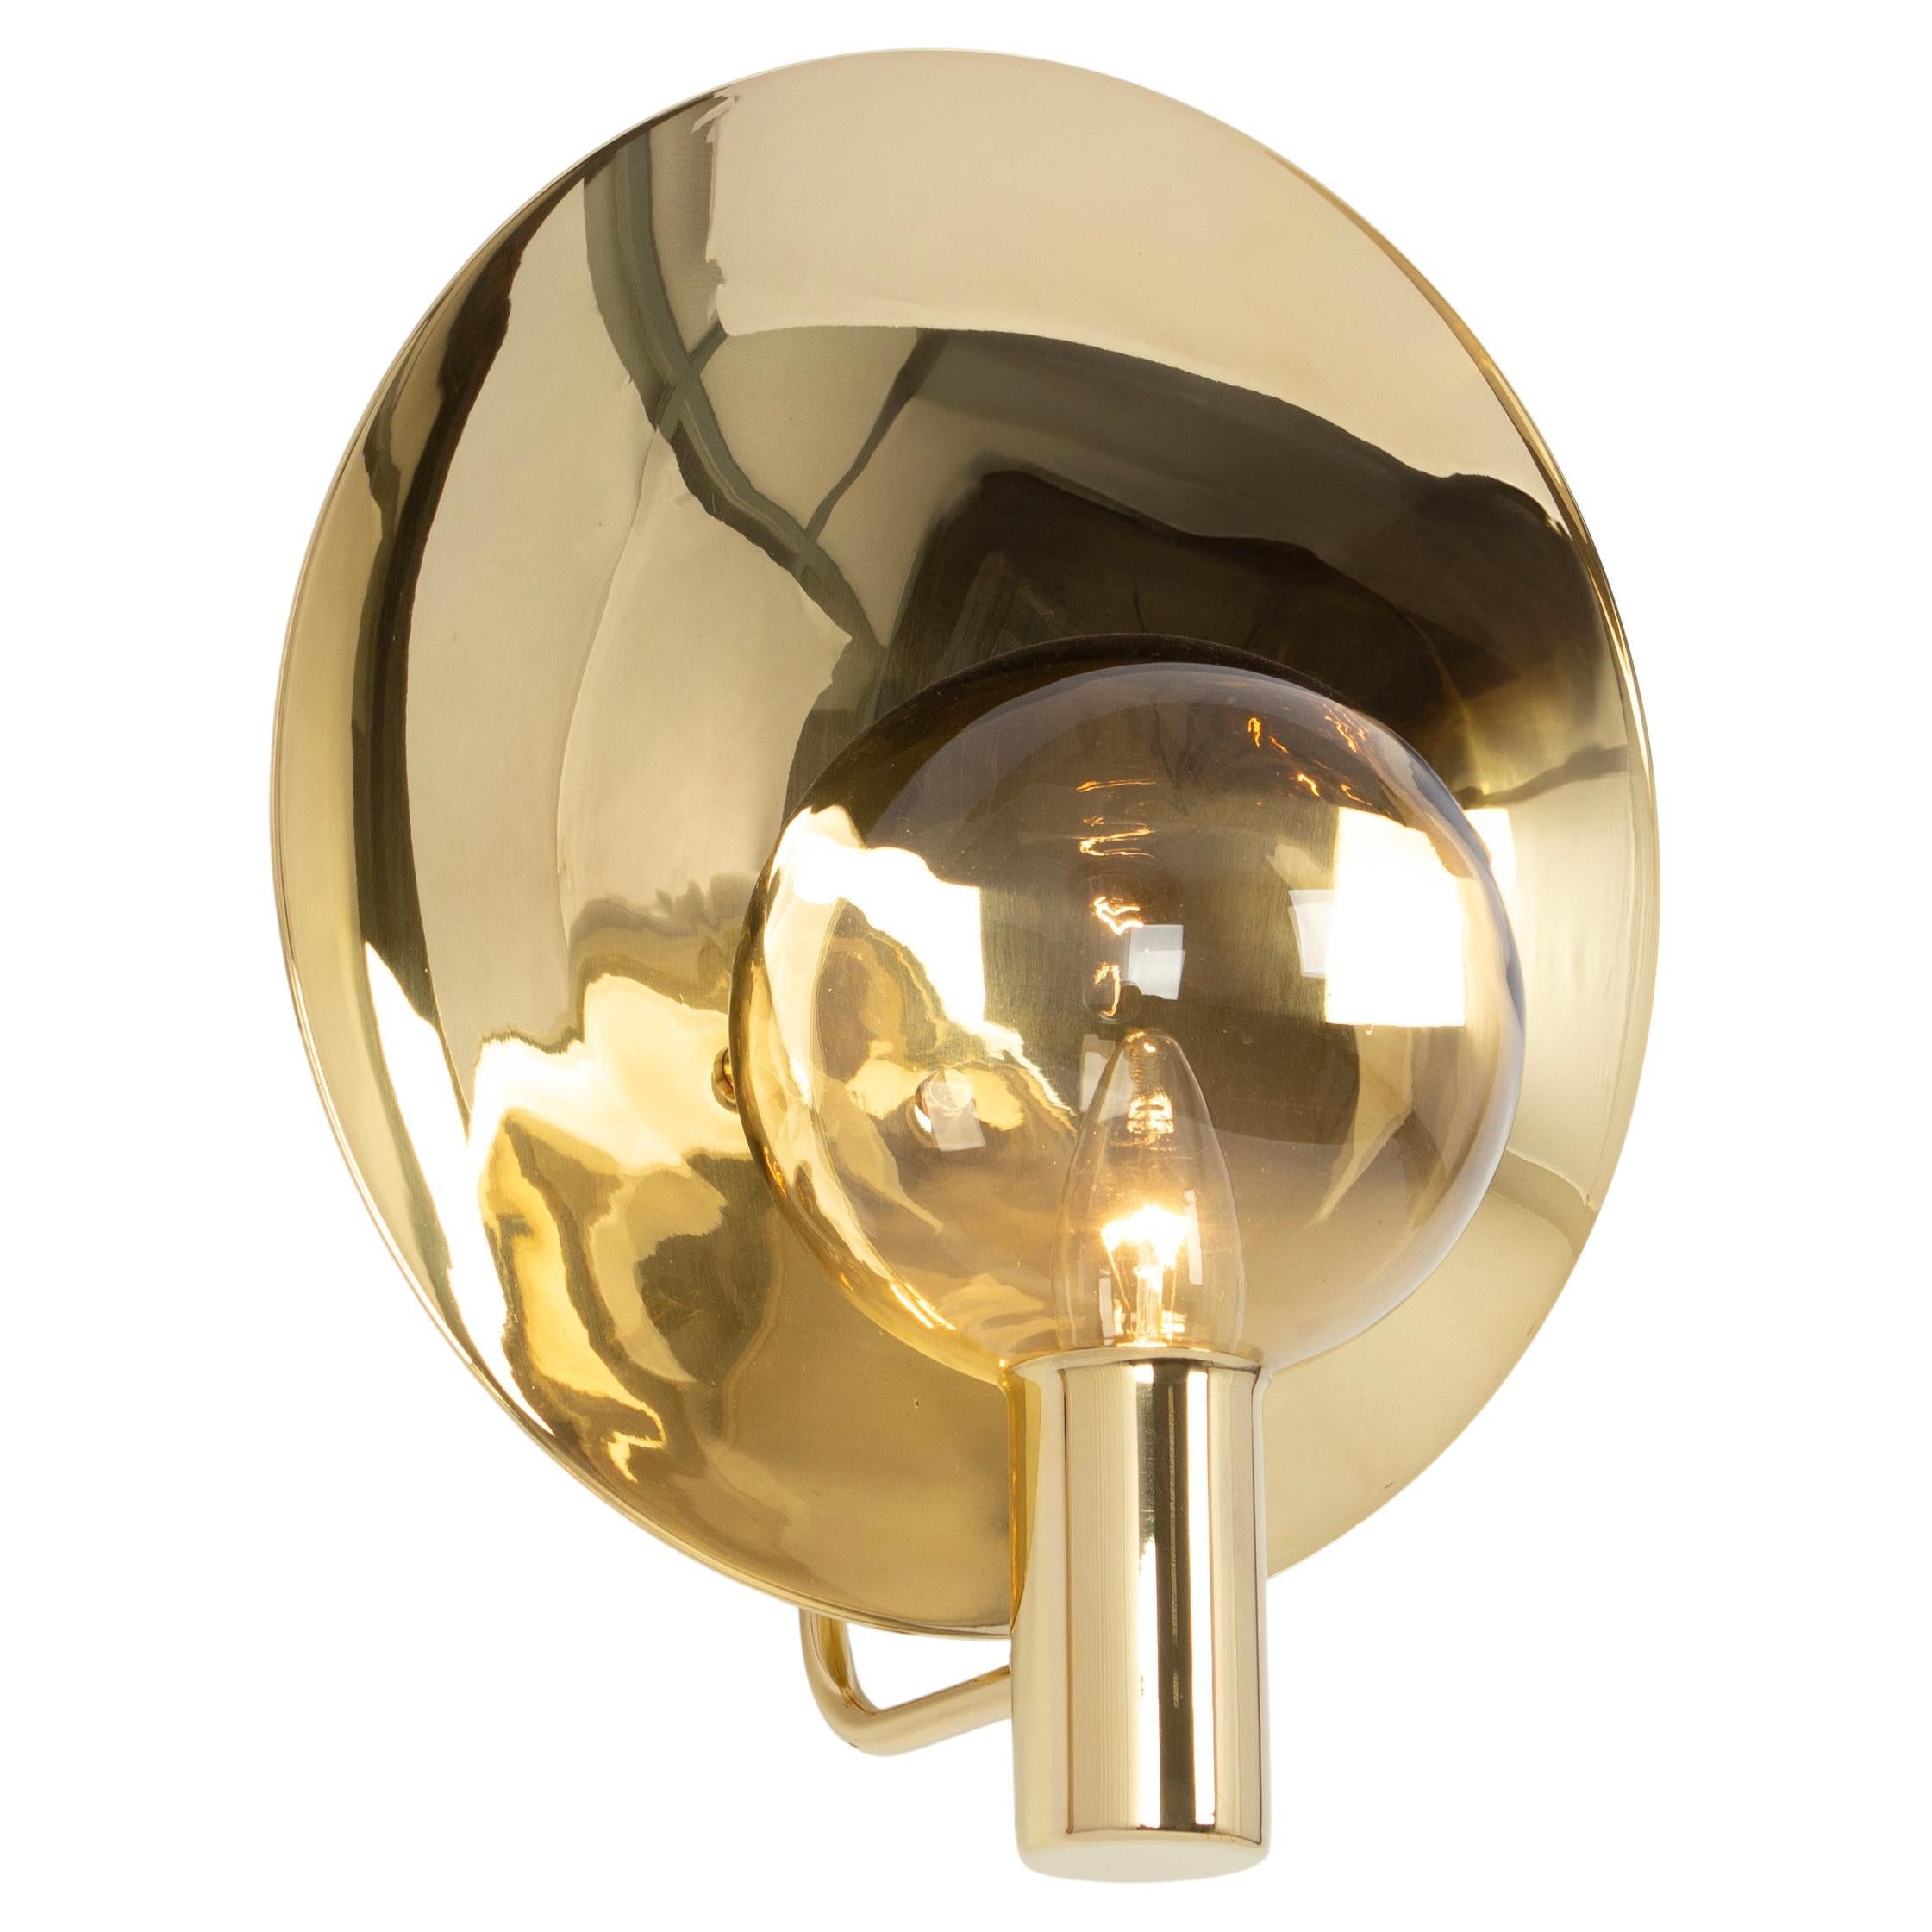 Stunning Large Brass and Smoke Glass Sconce, Hans Agne jakobsson, Sweden, 1970s